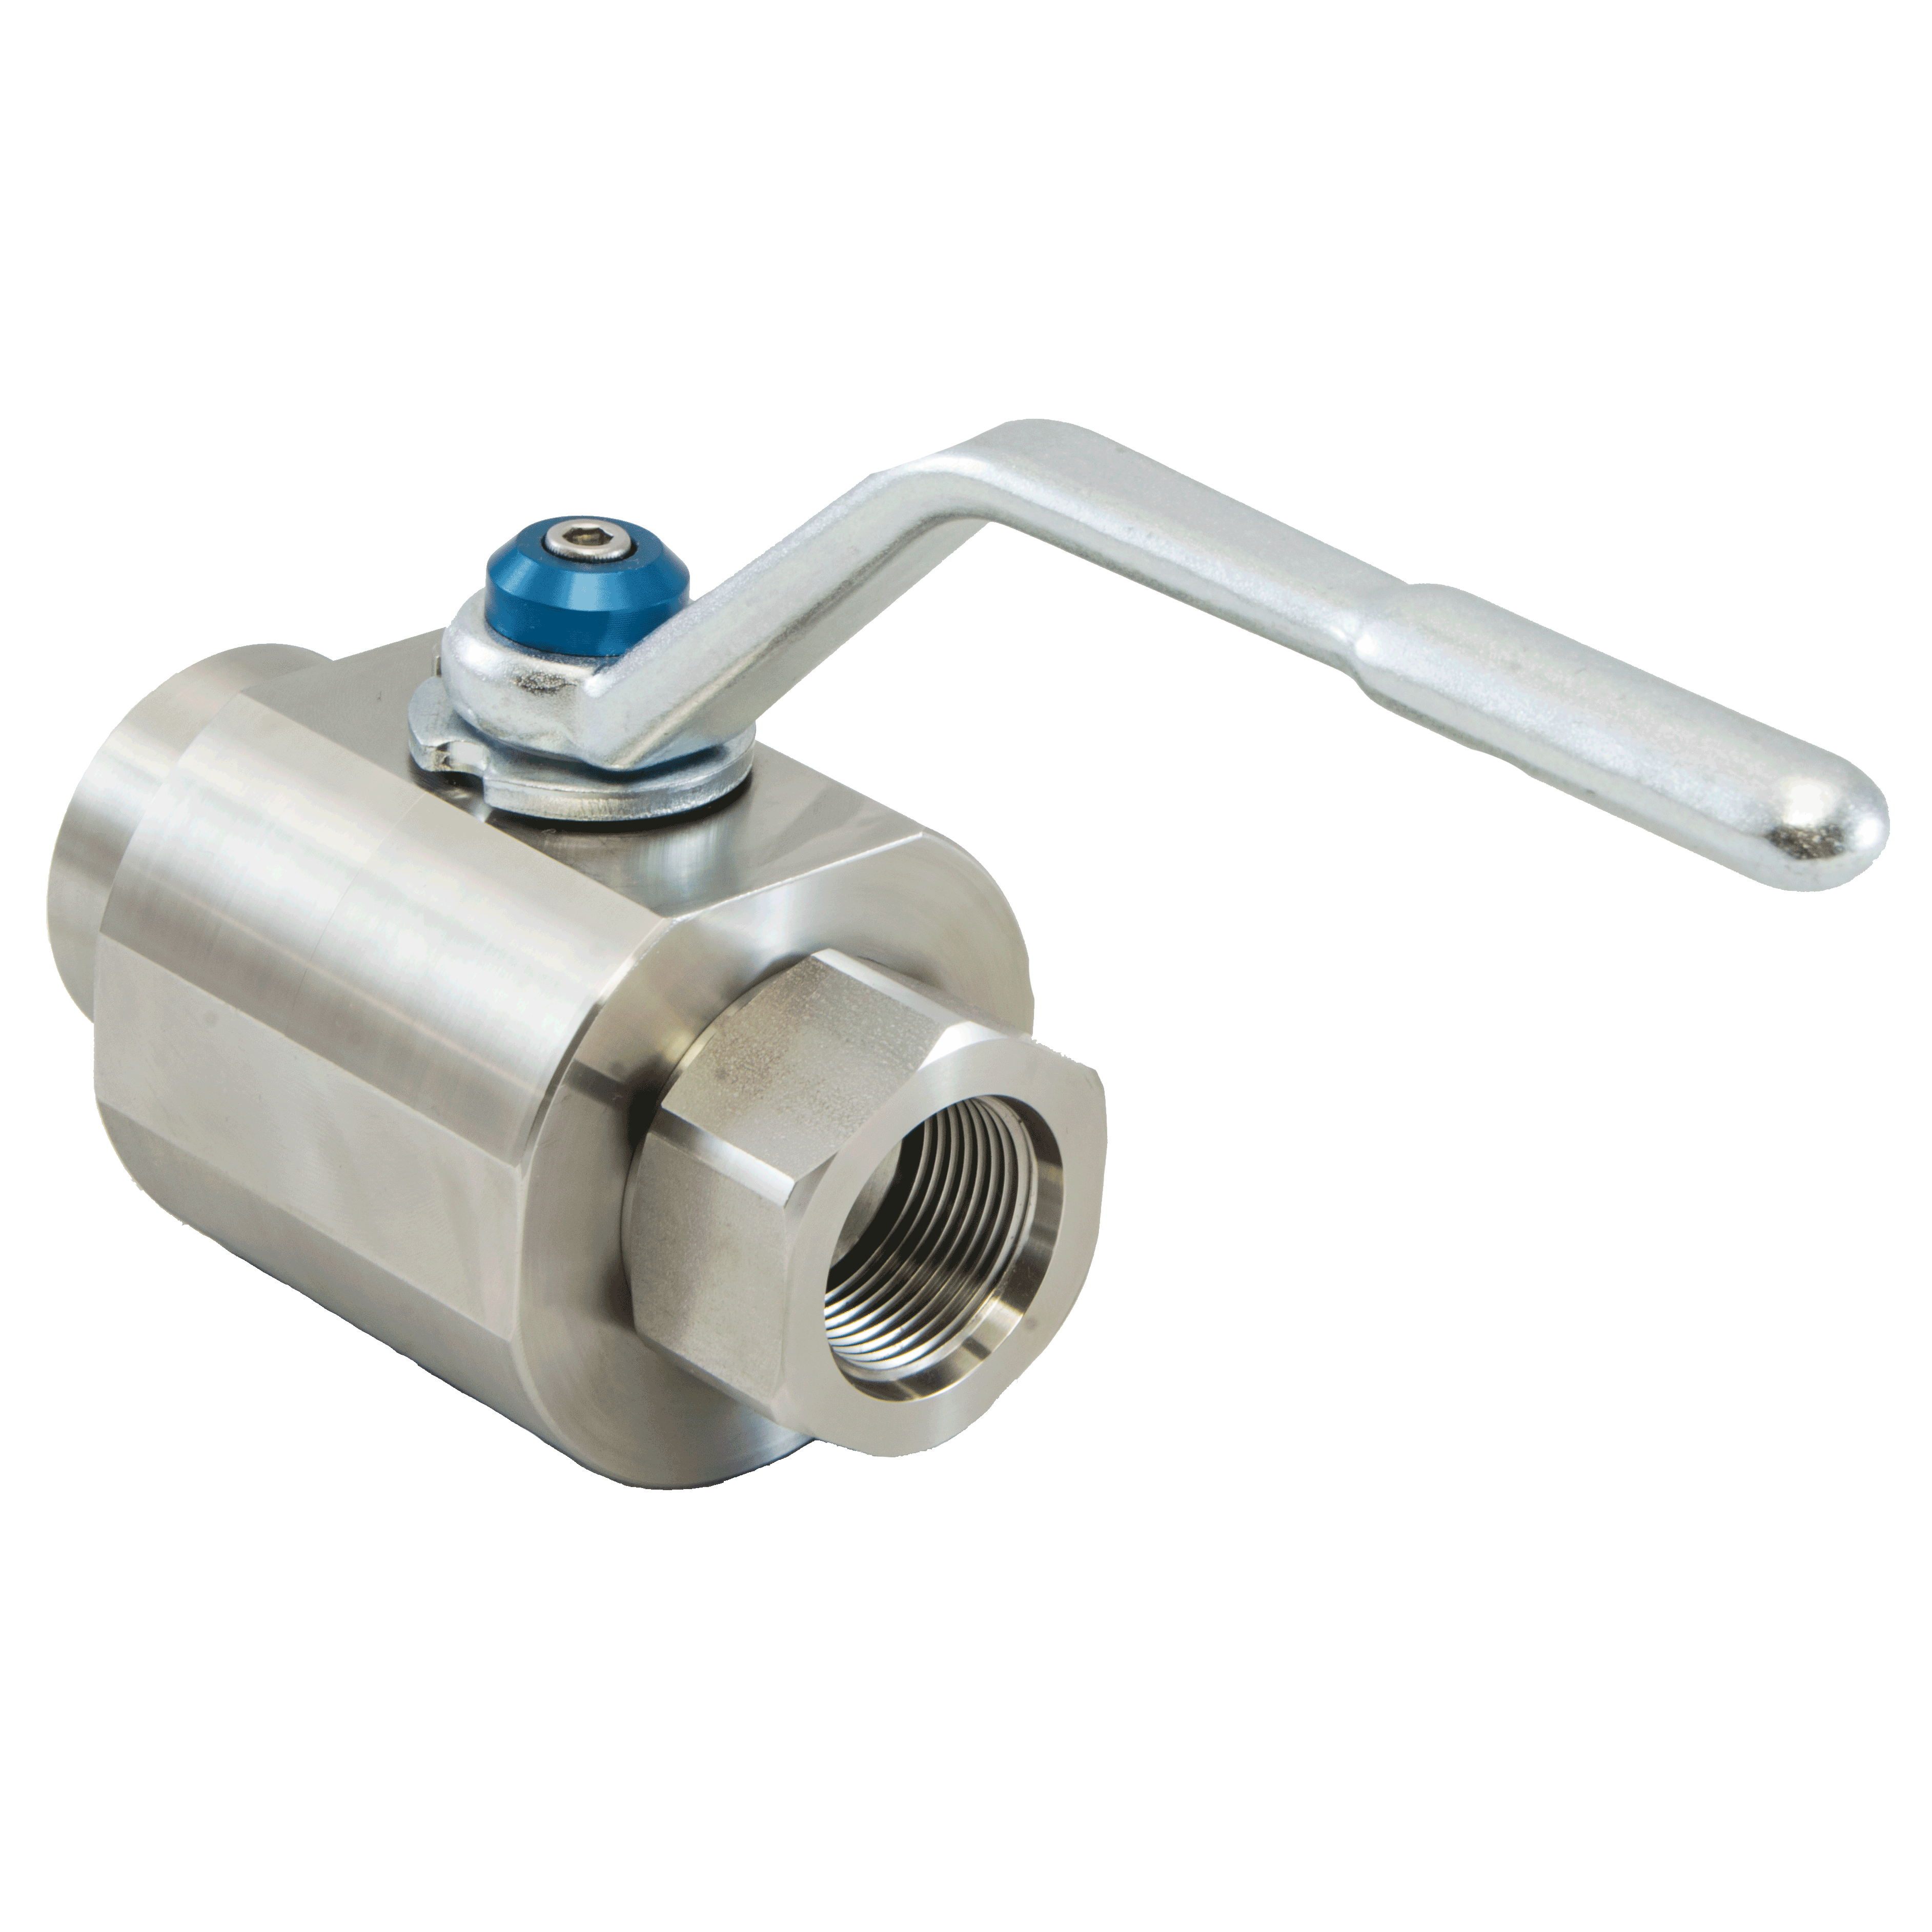 BVHS-2000N-2213 : DMIC Stainless Round Body Ball Valve, 2 NPT, 316 Stainless Steel, 6000psi, Two-Way